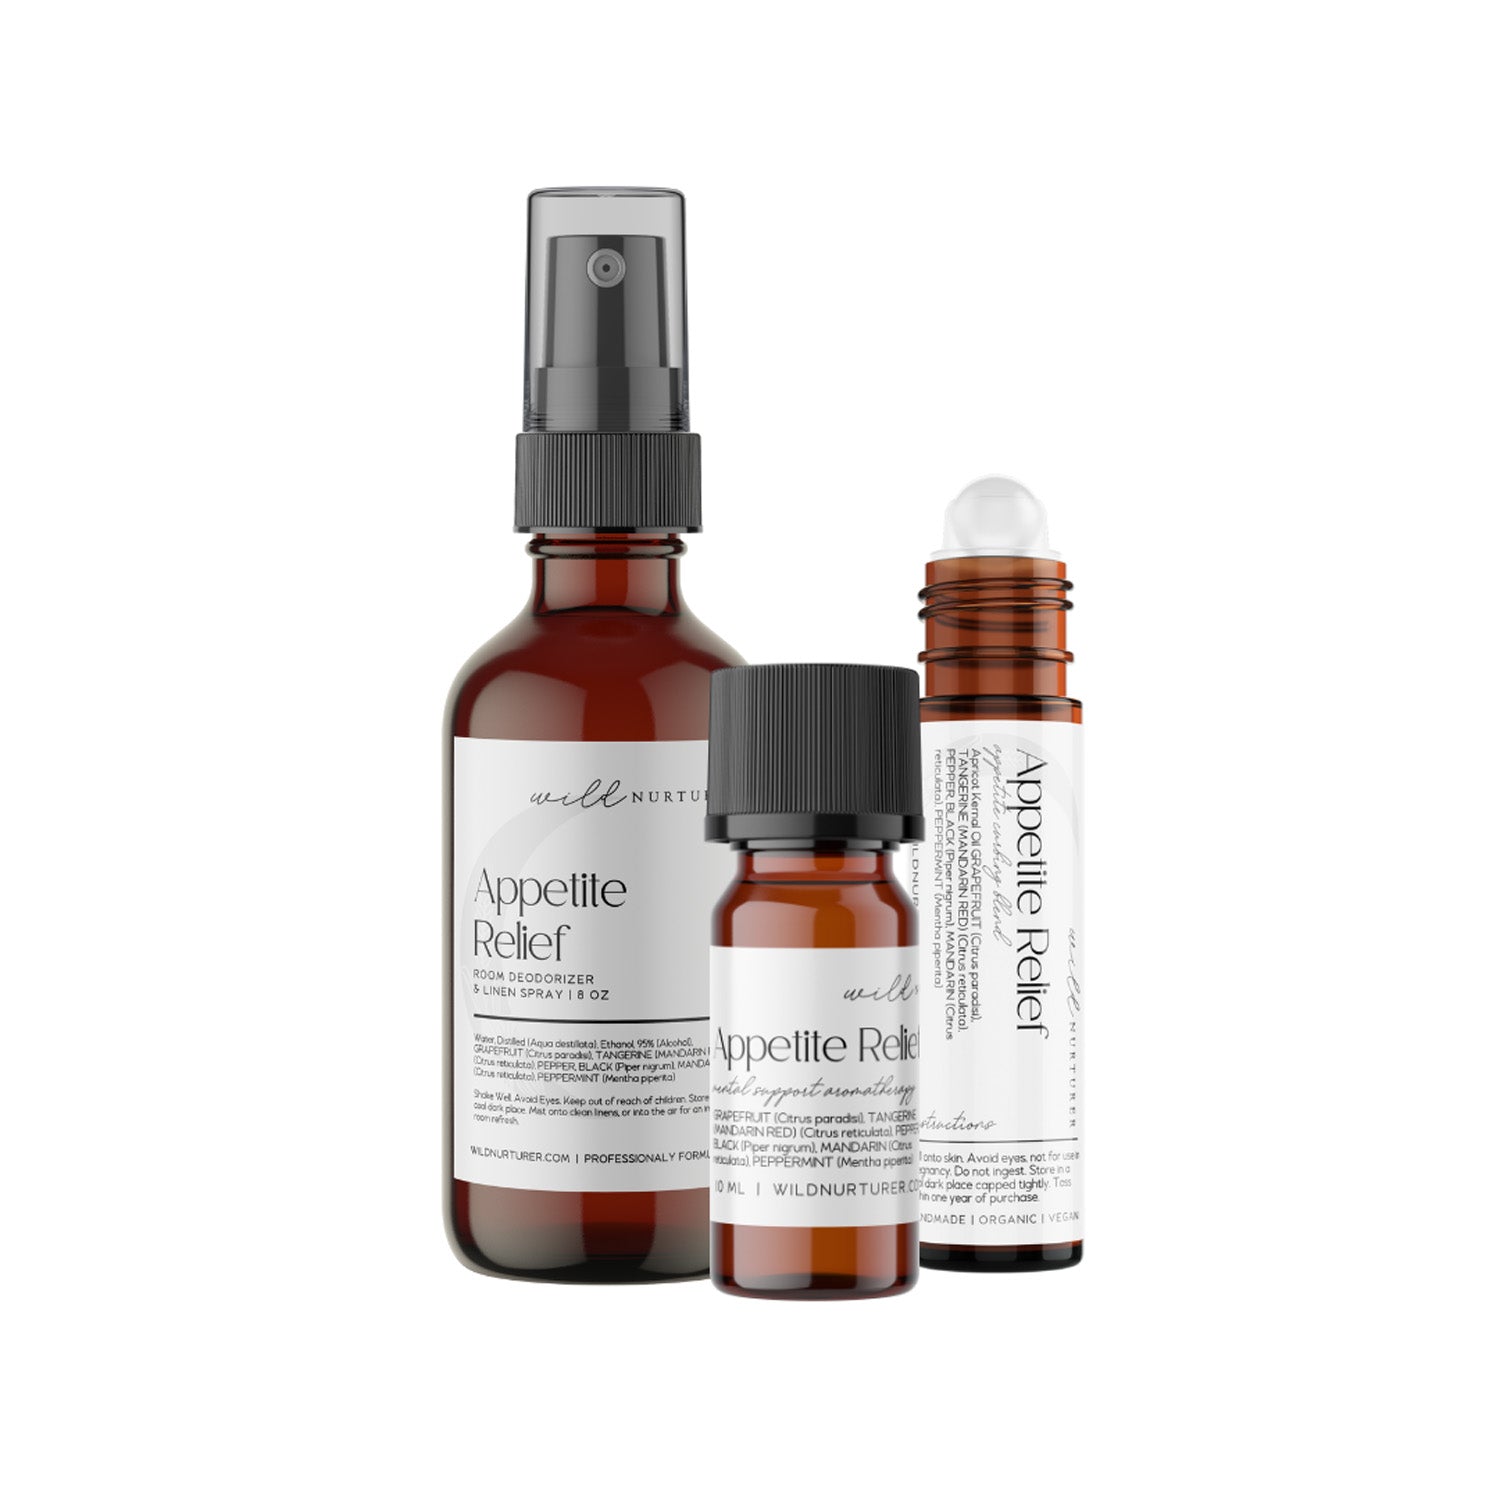 Three bottles of Wild Nurturer Aromatherapy Appetite Relief skincare products with labels, one with a spray nozzle and two with droppers, isolated on a white background.